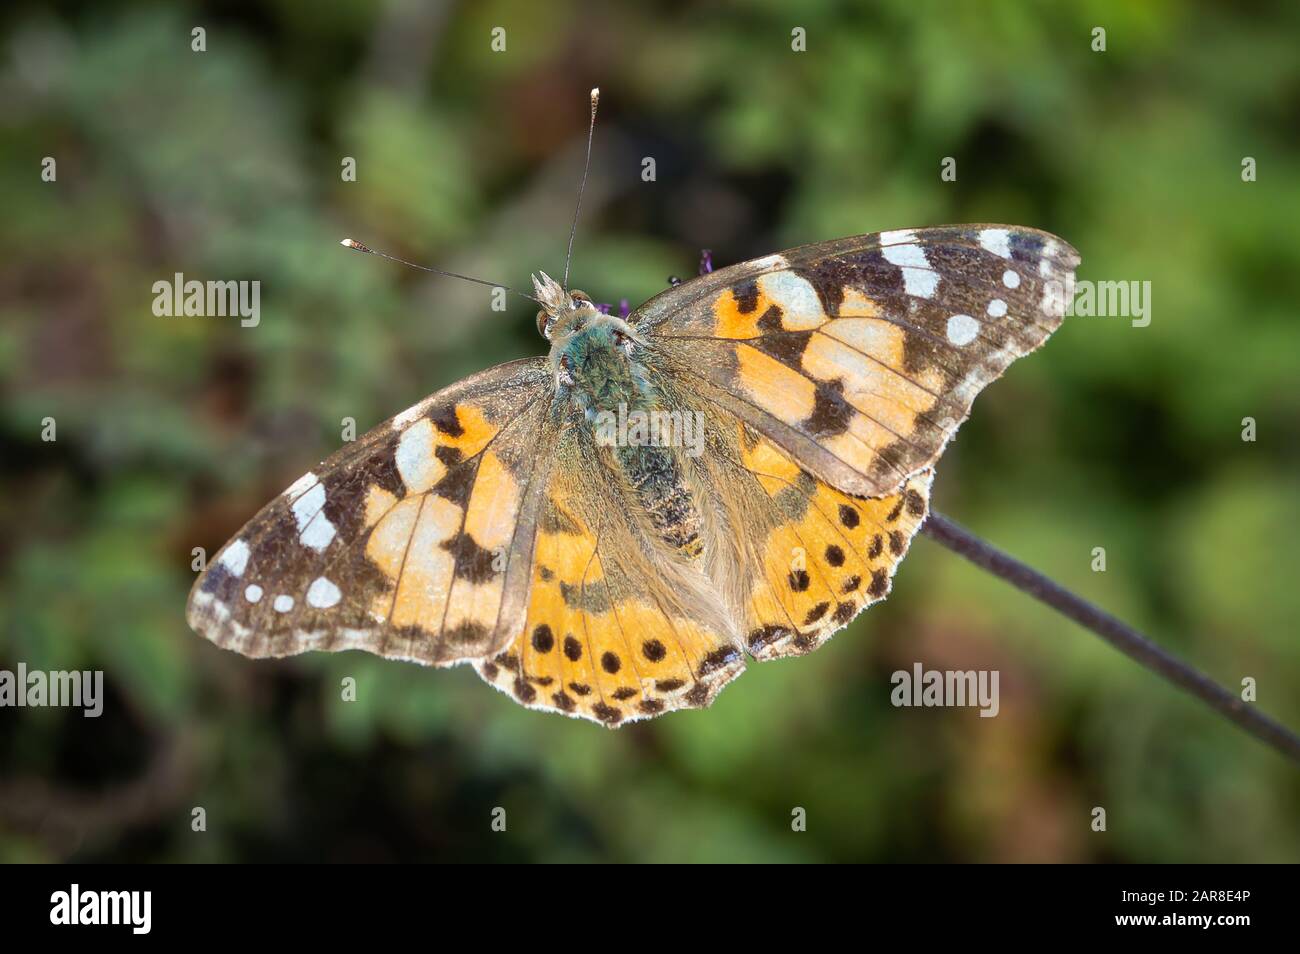 Painted Lady butterfly with a blurred background Stock Photo